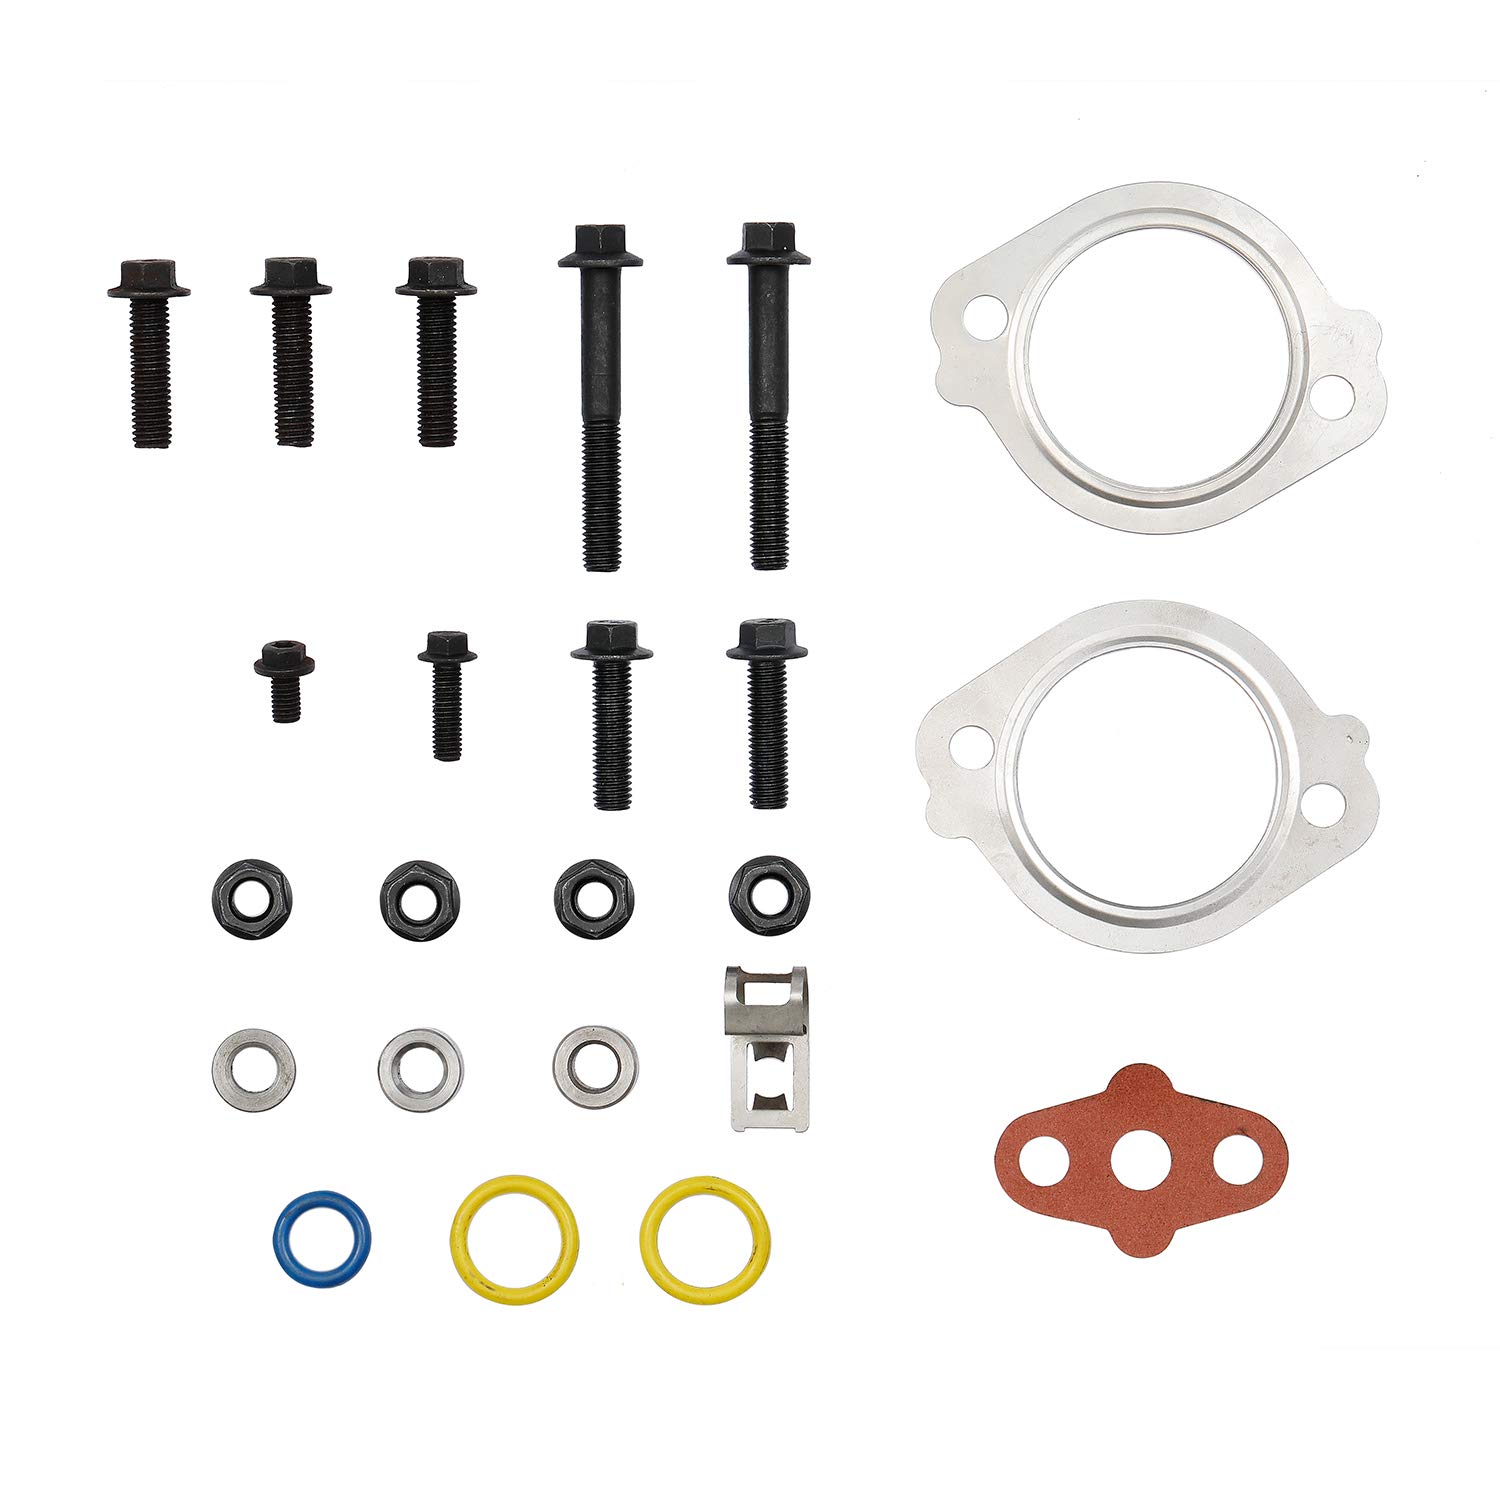 Y-Pipe Up Pipe Turbo Install Kit For 2003-2007 Ford 6.0 Powerstroke https://www.minimaxxtuner.com